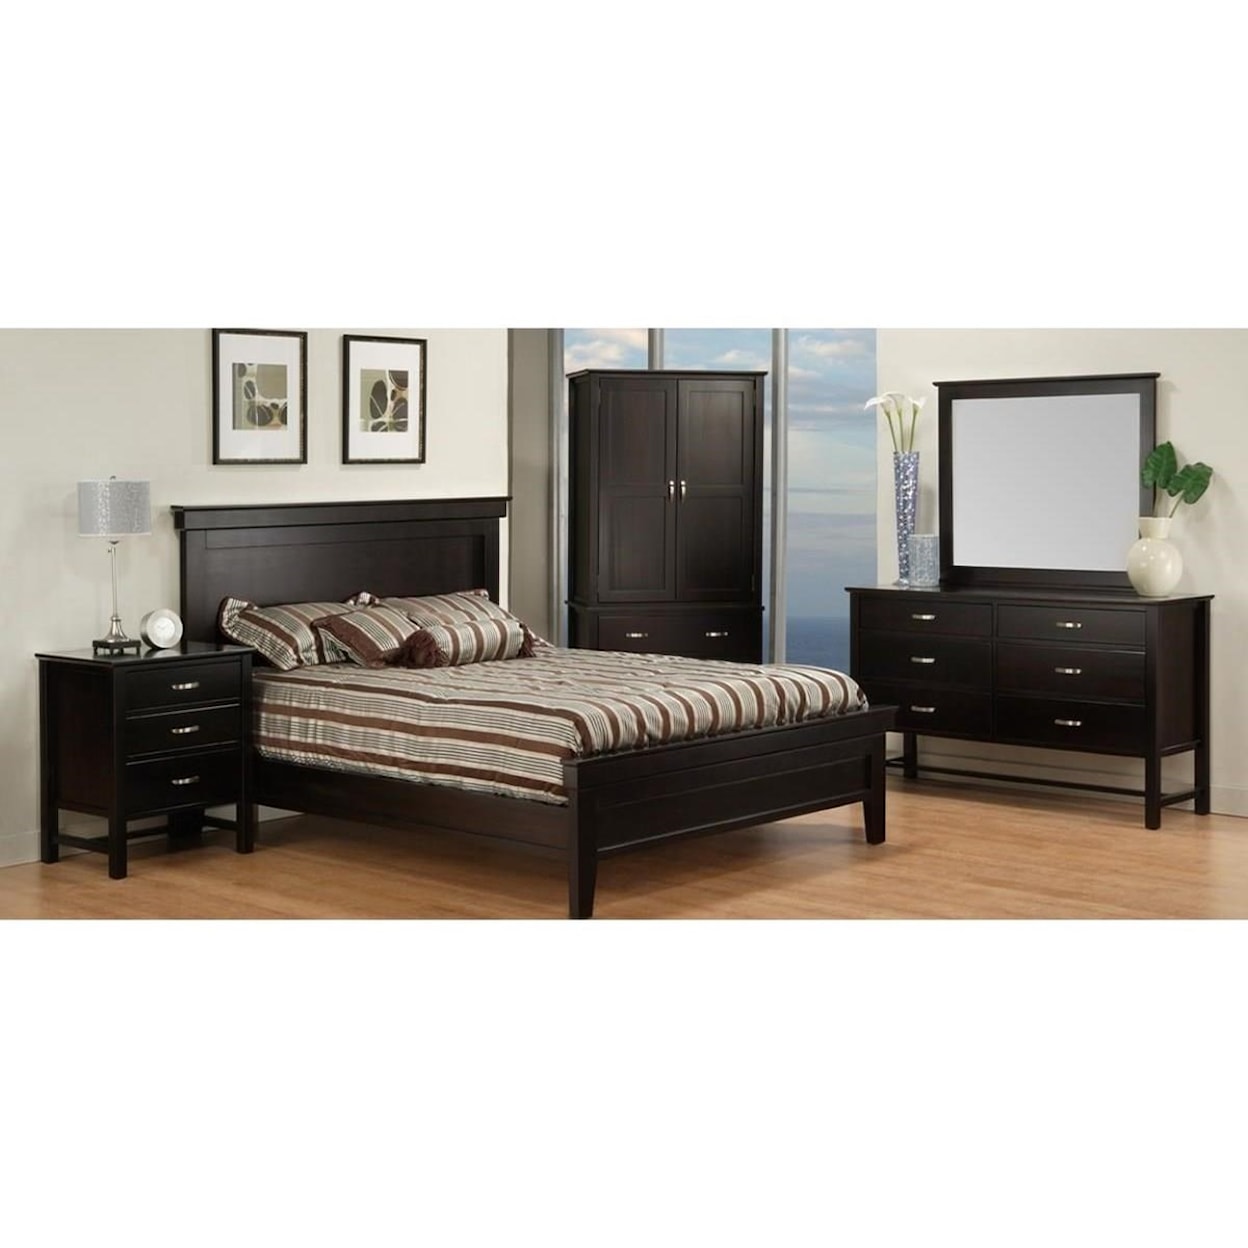 Handstone Brooklyn Twin Bed with Low Footboard